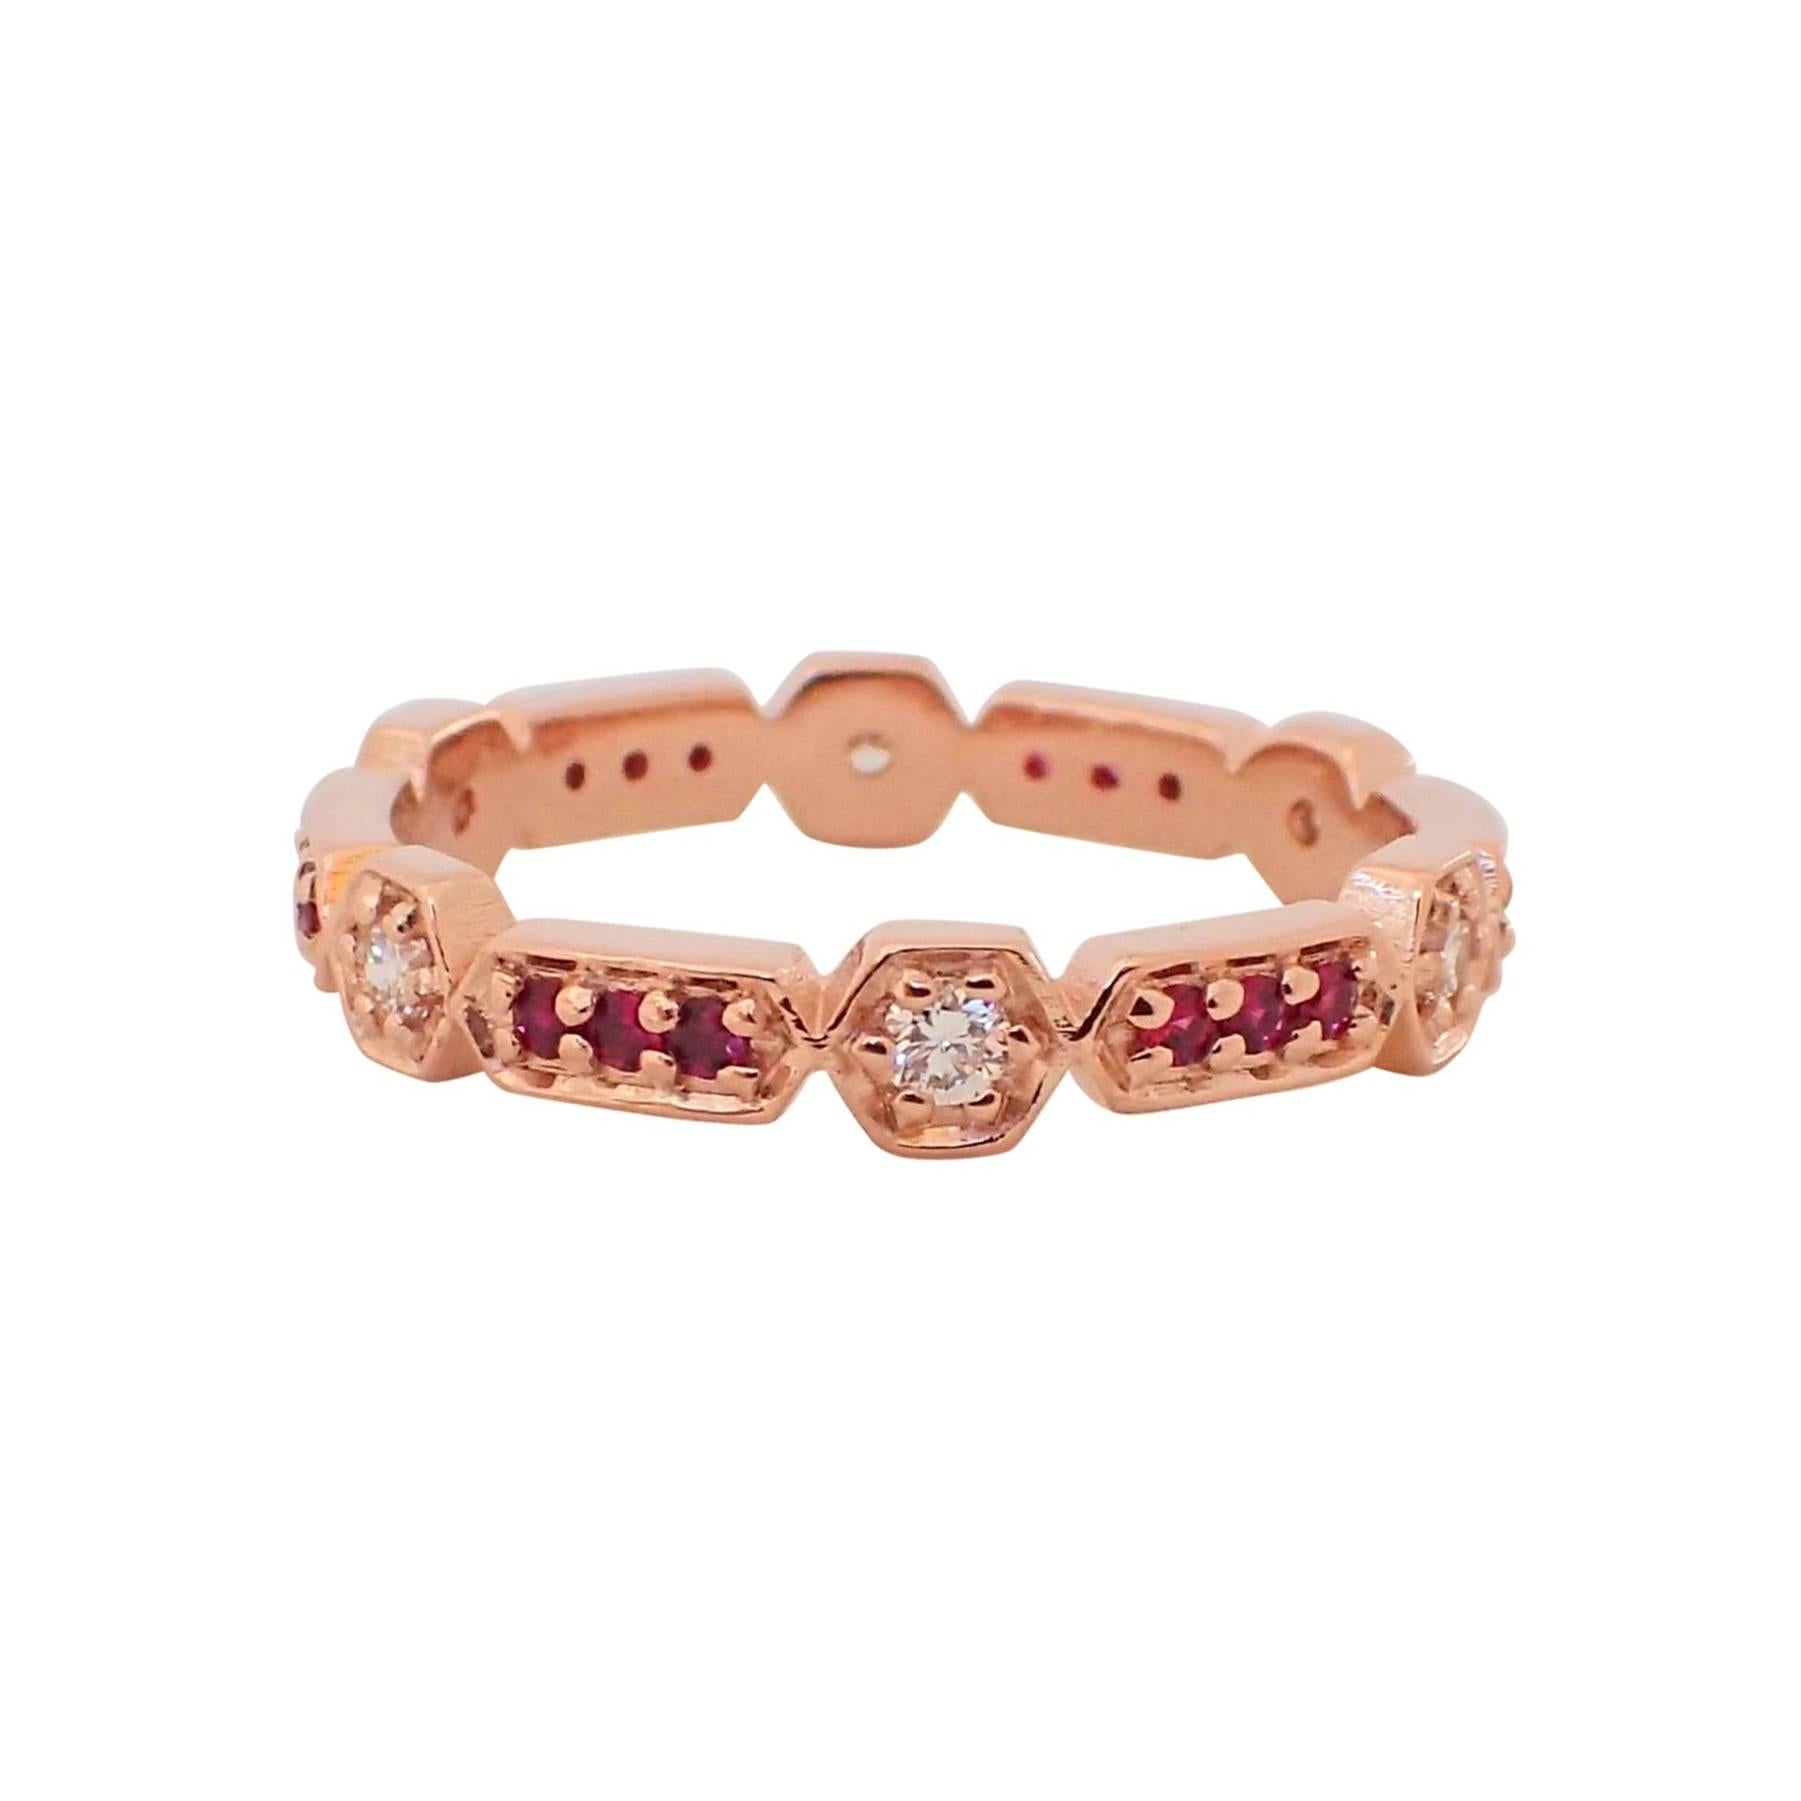 18 Karat Gold Eternity Band with 0.19 Carat of Diamond and 0.20 Carat of Ruby